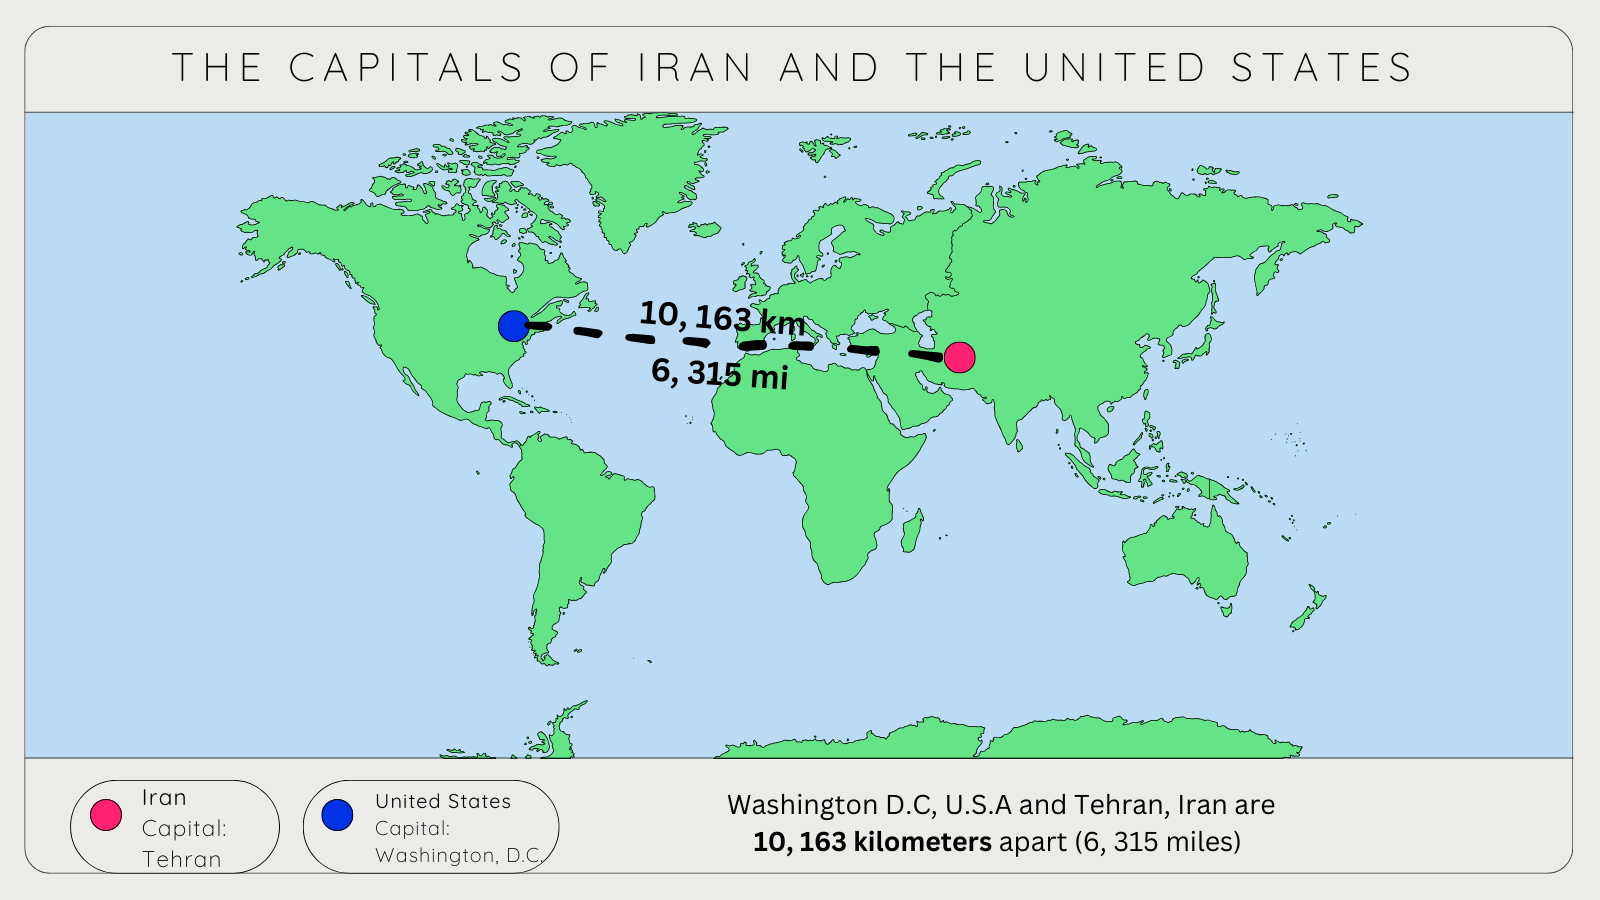 Picture of a map showing the seven continents. Highlighting the capital of Iran (Tehran) and the capital of the United States (Washington, D.C) to show their comparative distance. 